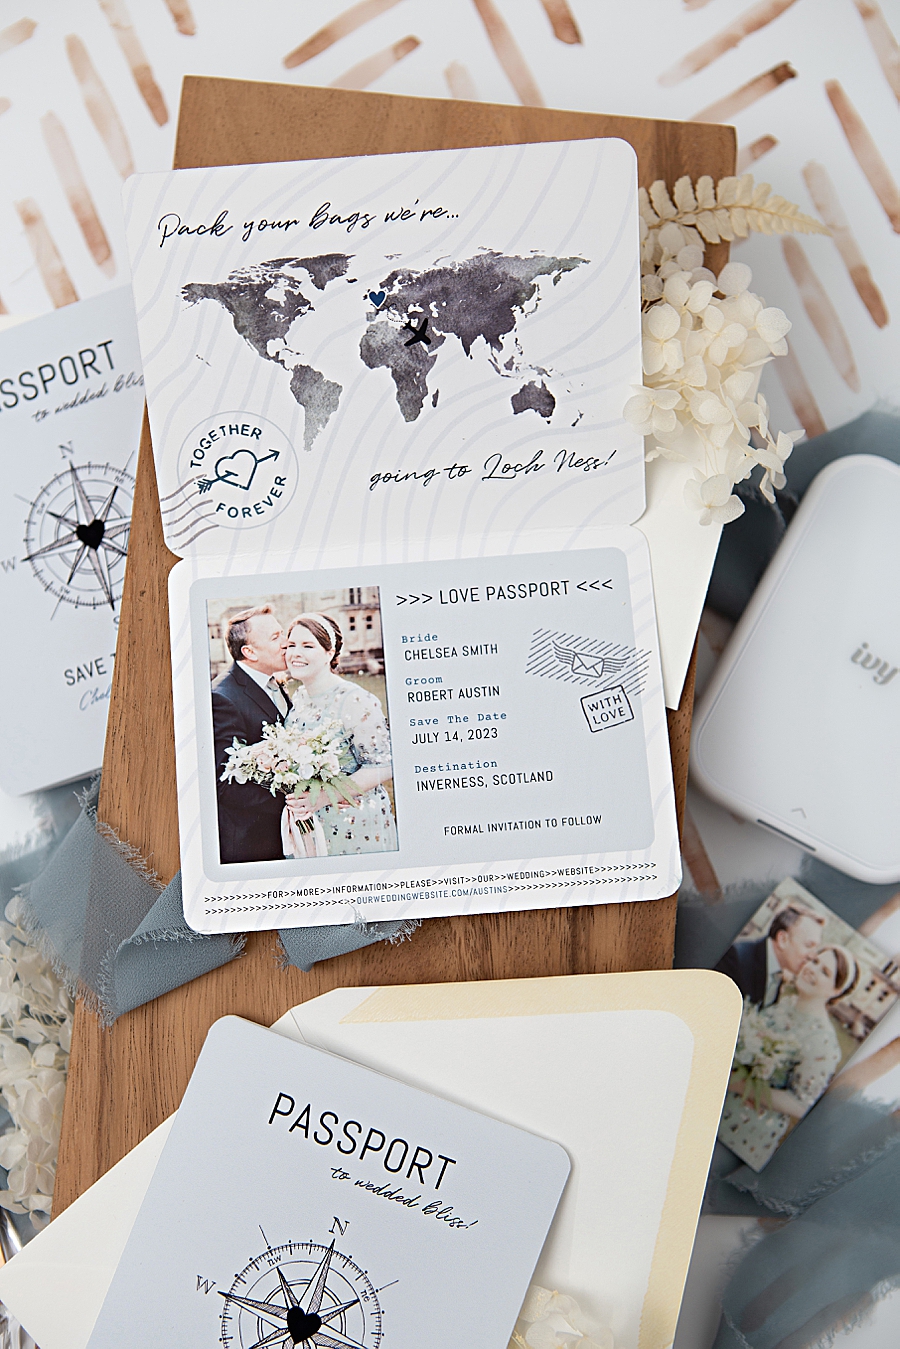 Use your Canon IVY 2 mini photo printer to make these passport style save the date invitations!